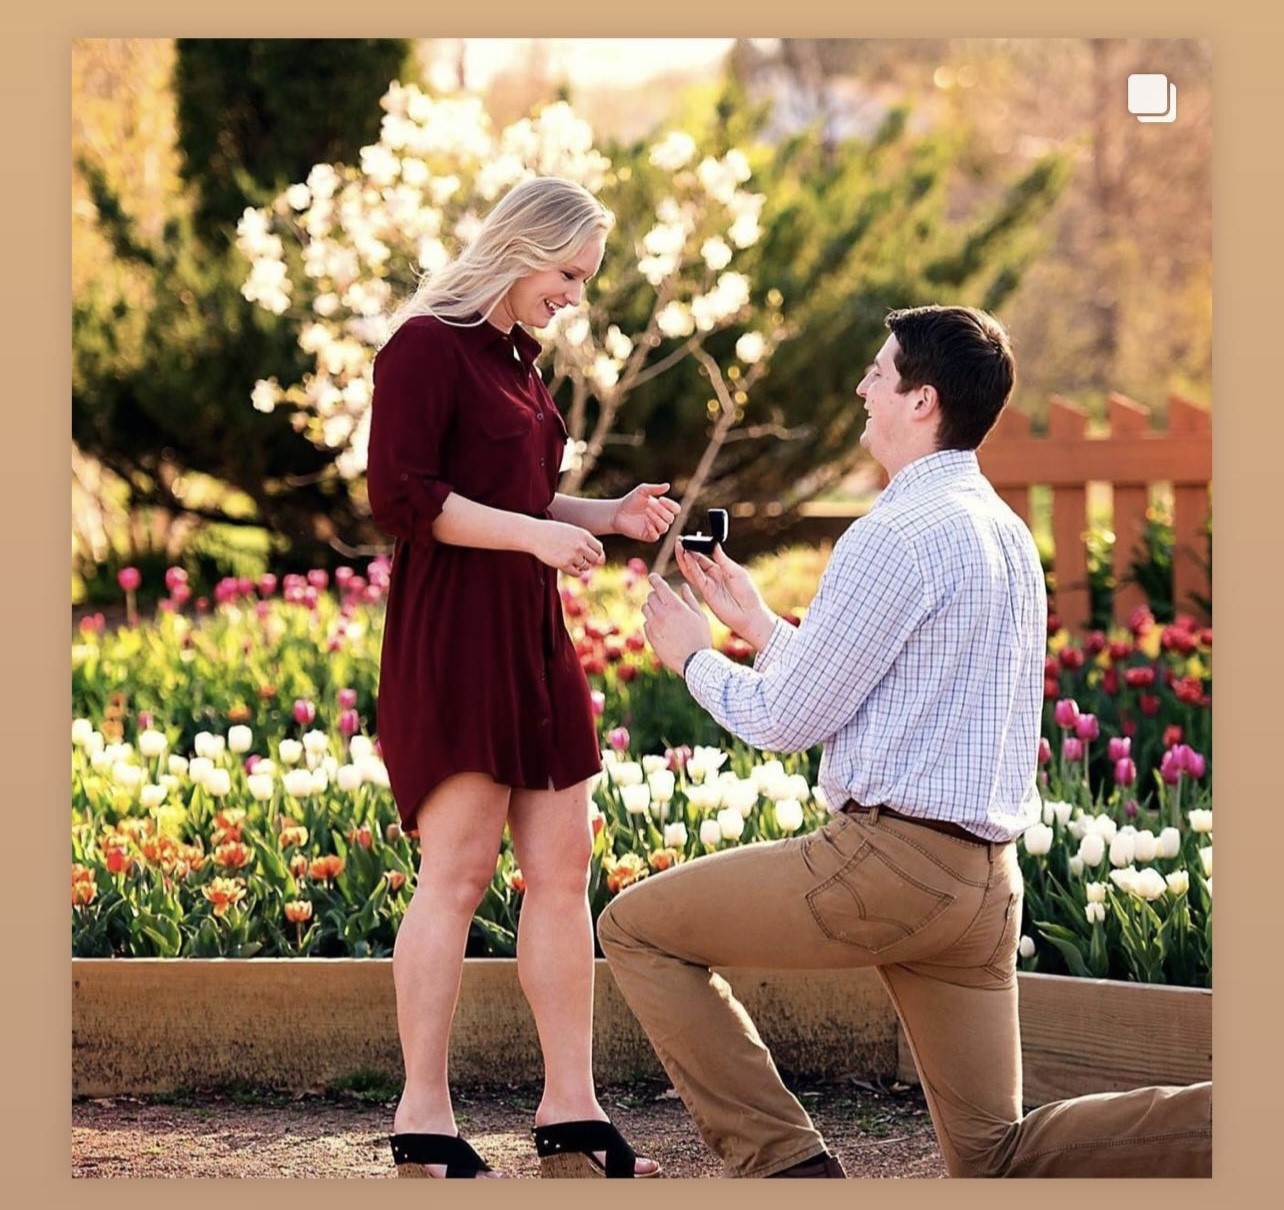 A man is down on one knee, holding a ring out to a woman. She, happily, accepts.